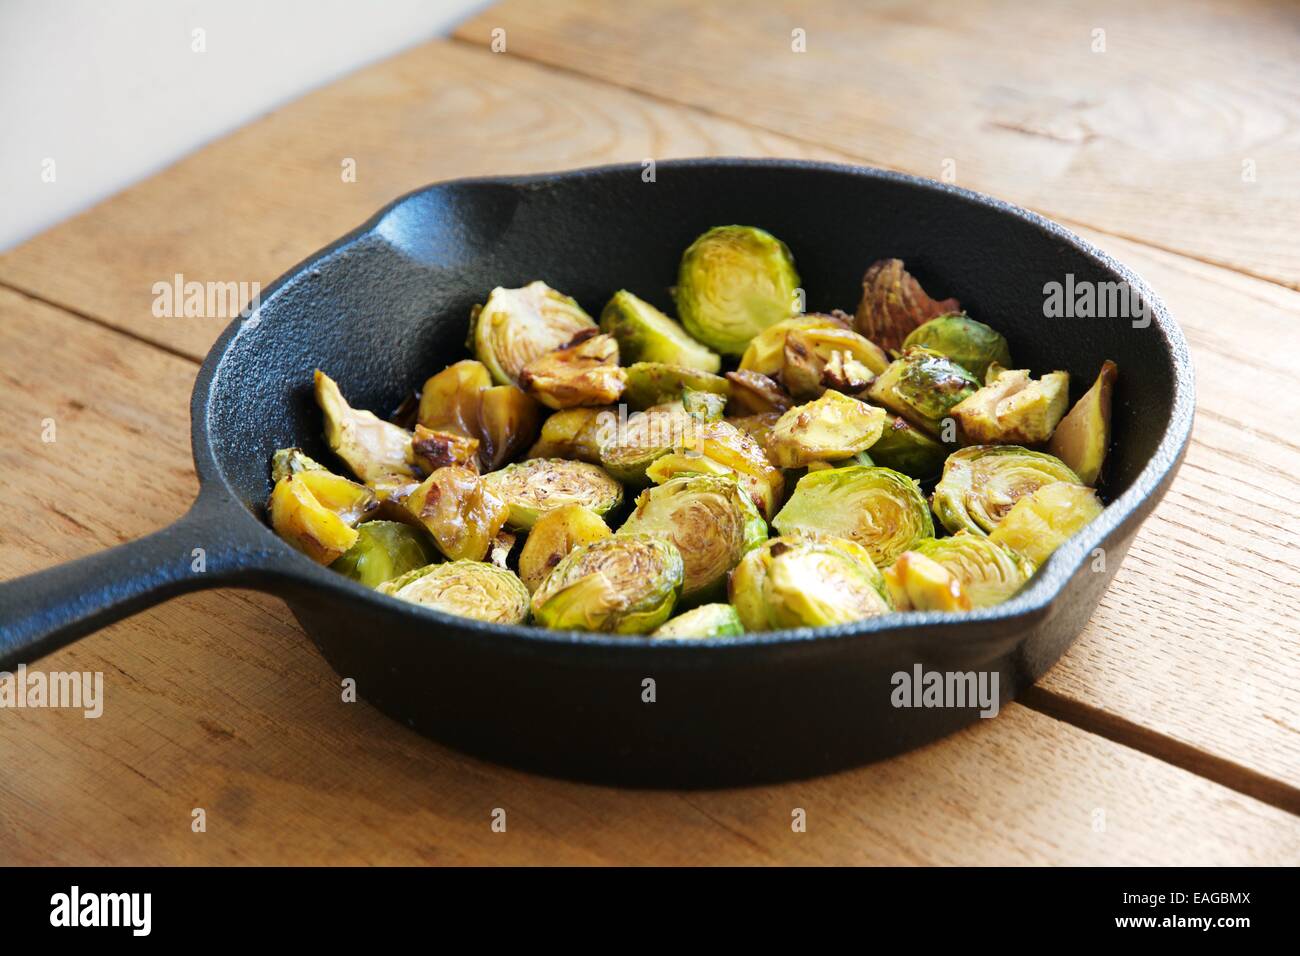 Roasted Brussels sprouts and chestnuts with a balsamic vinegar sauce in a cast iron skillet. Stock Photo